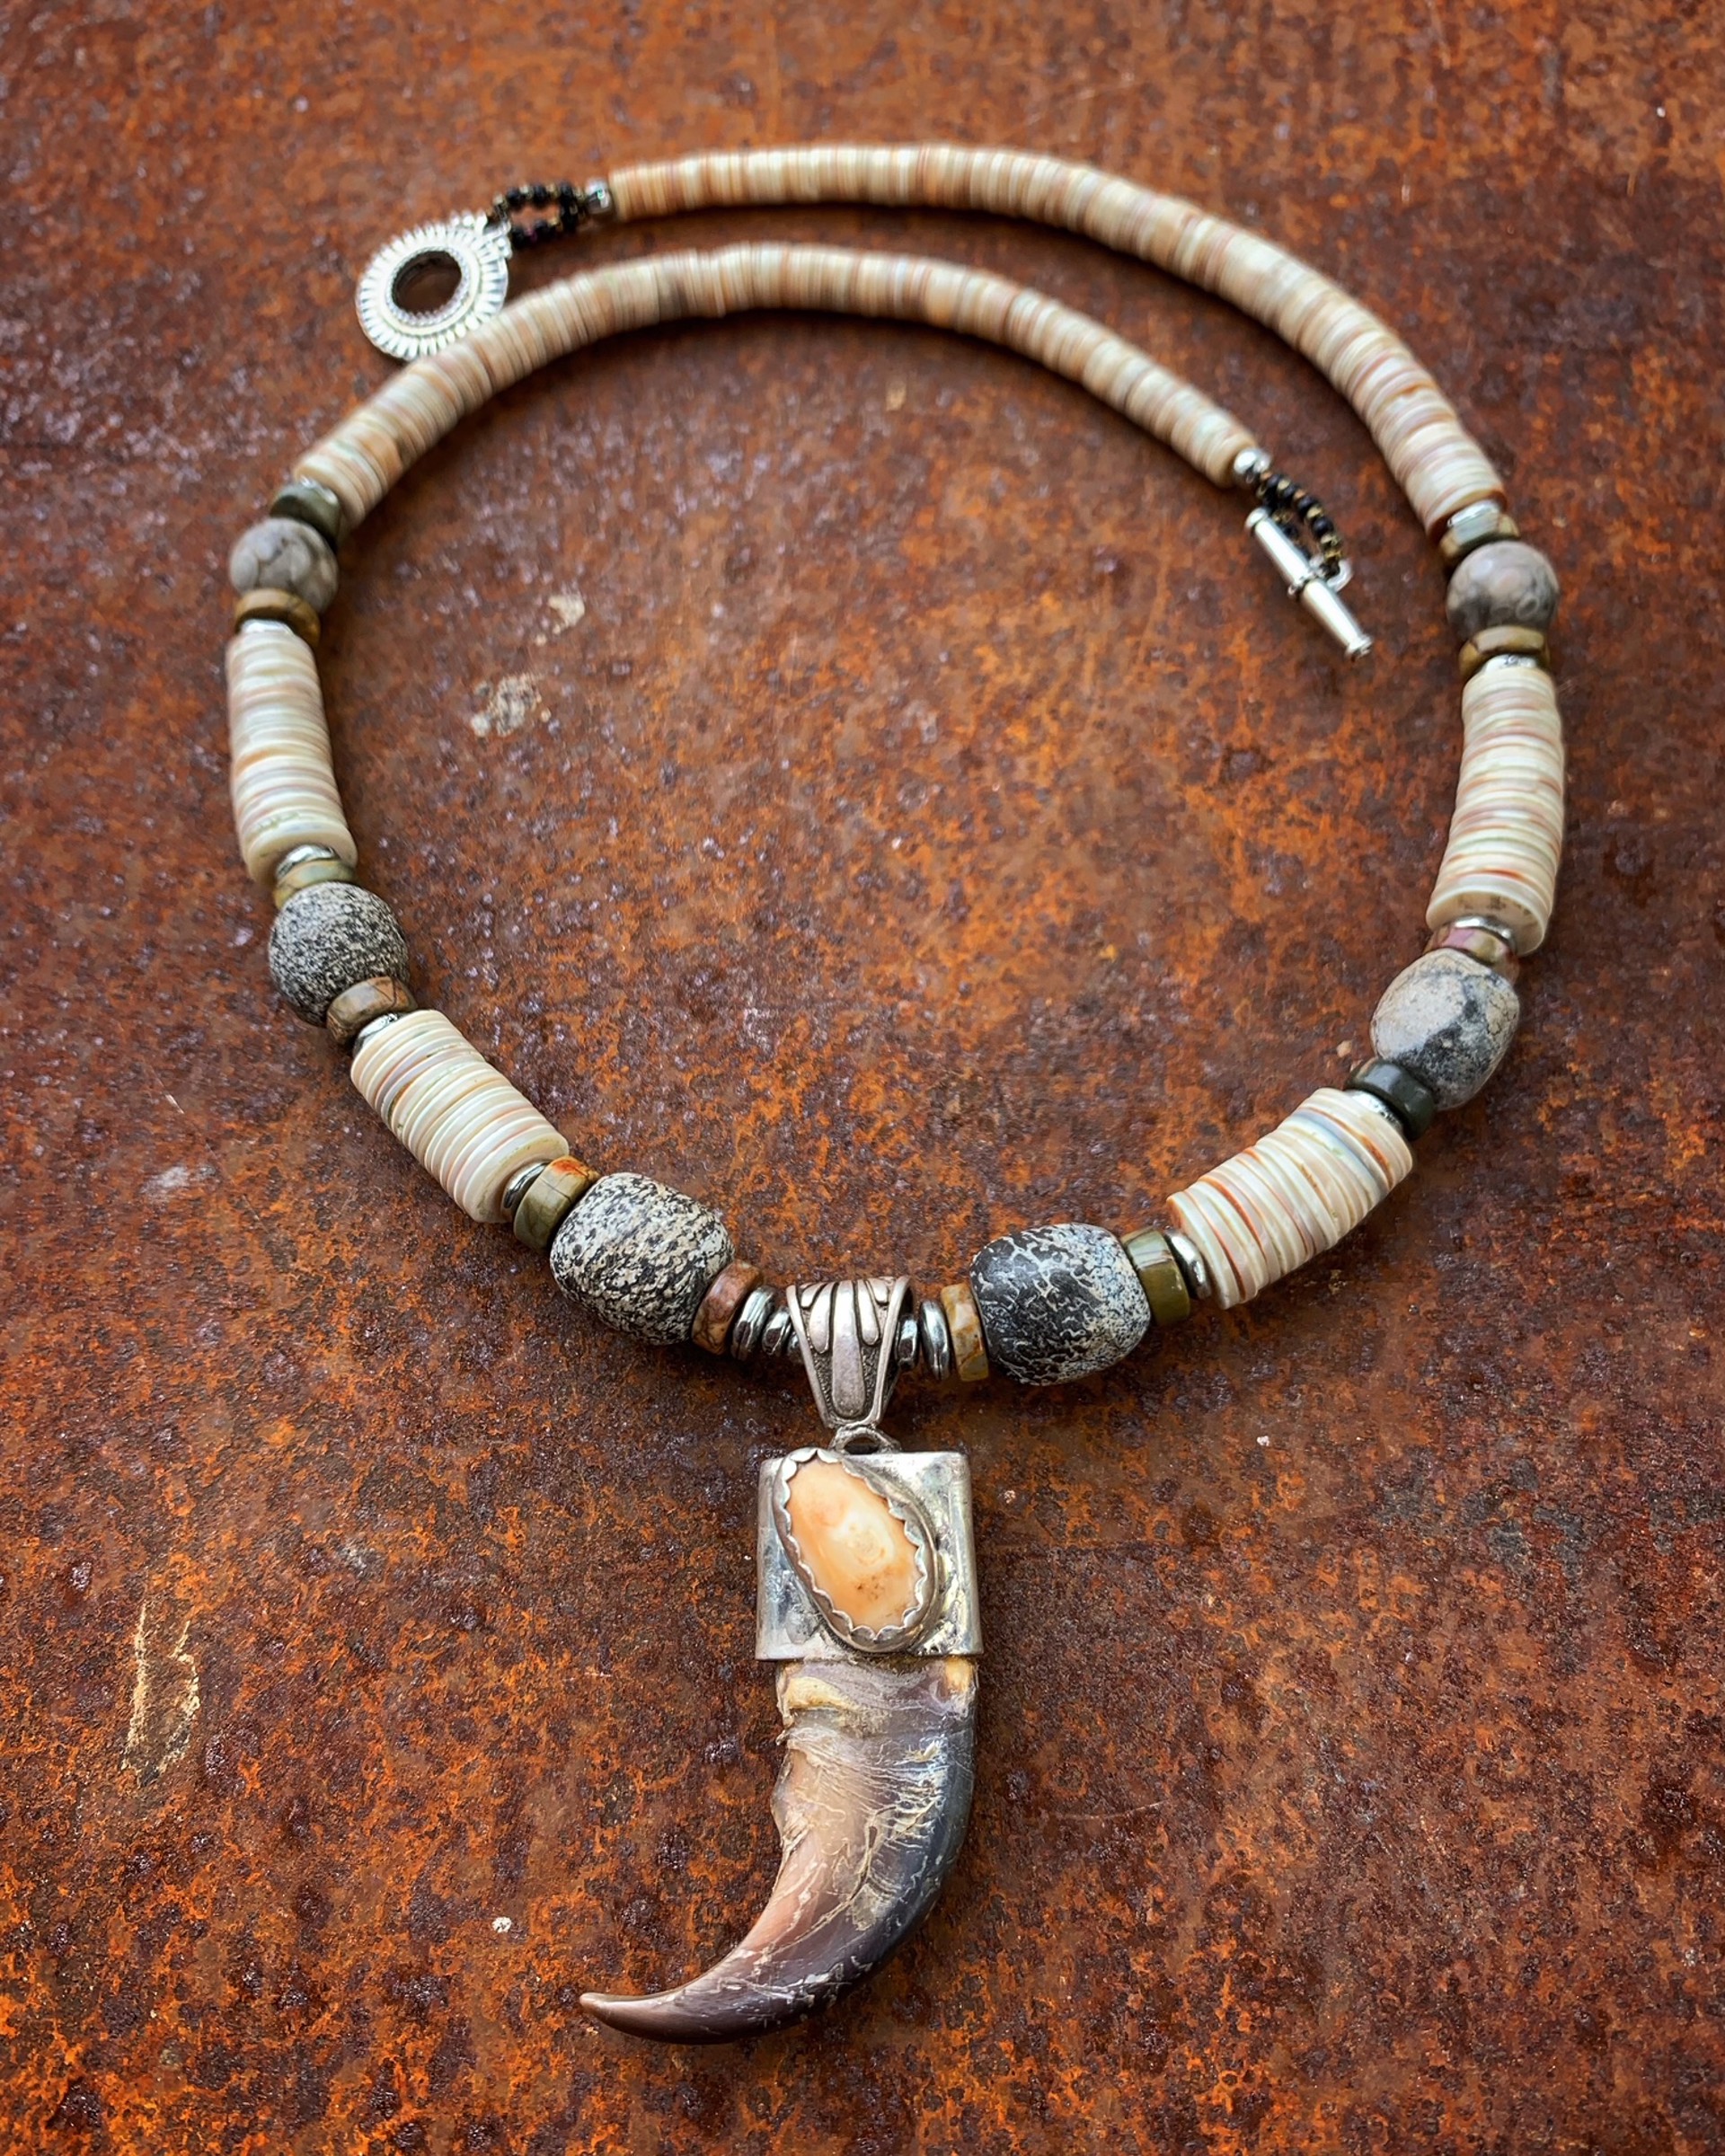 K824 Bear Claw with Elk Ivory on Chain of Fossilized Mastadon Bone and Shell Necklace by Kelly Ormsby